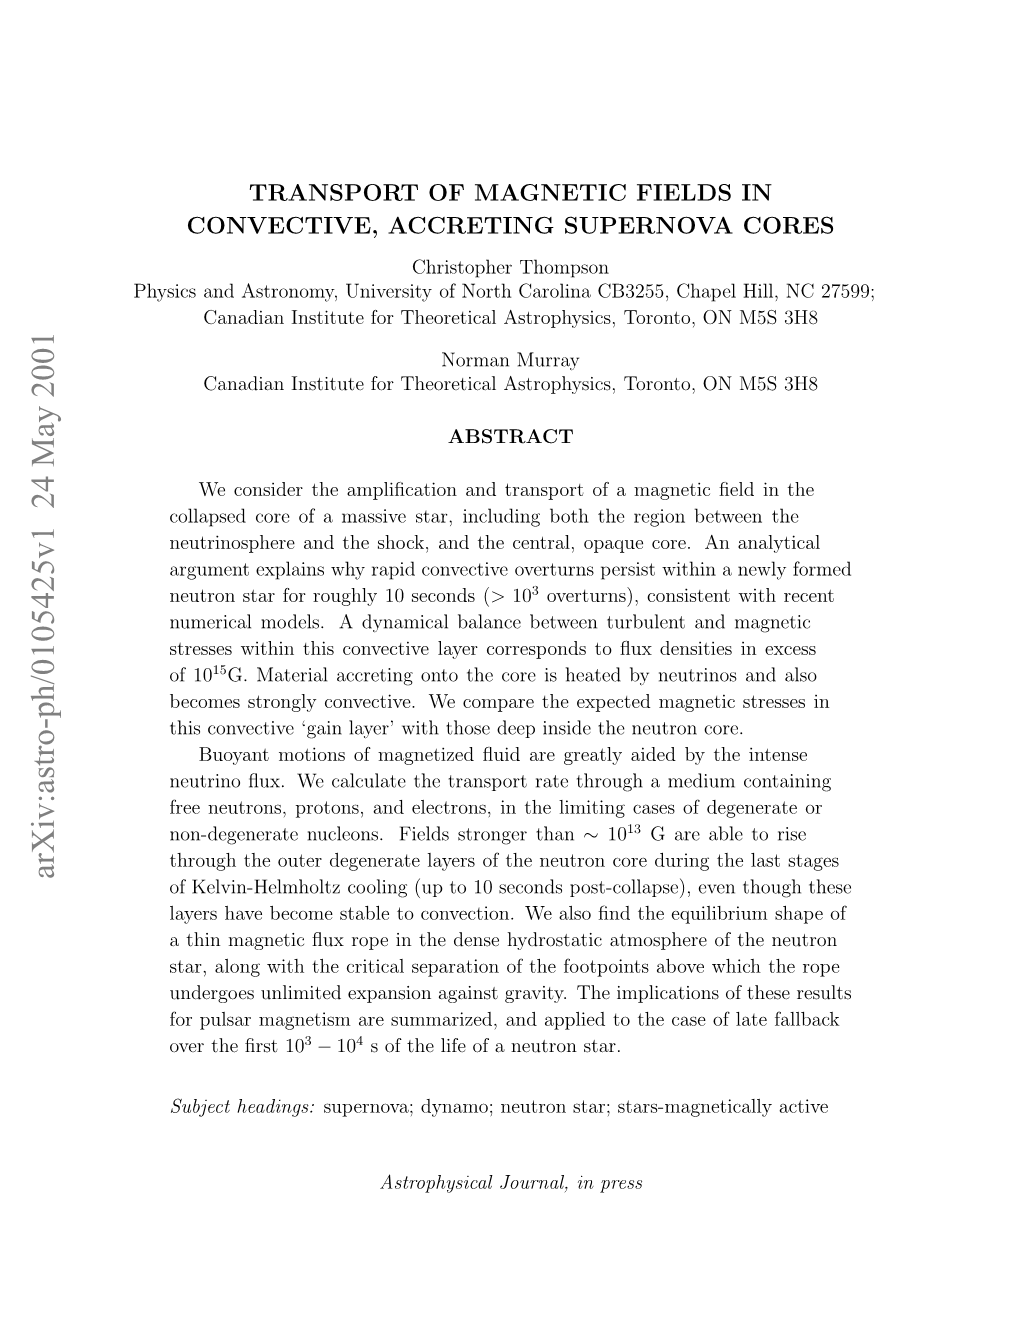 Transport of Magnetic Fields in Convective, Accreting Supernova